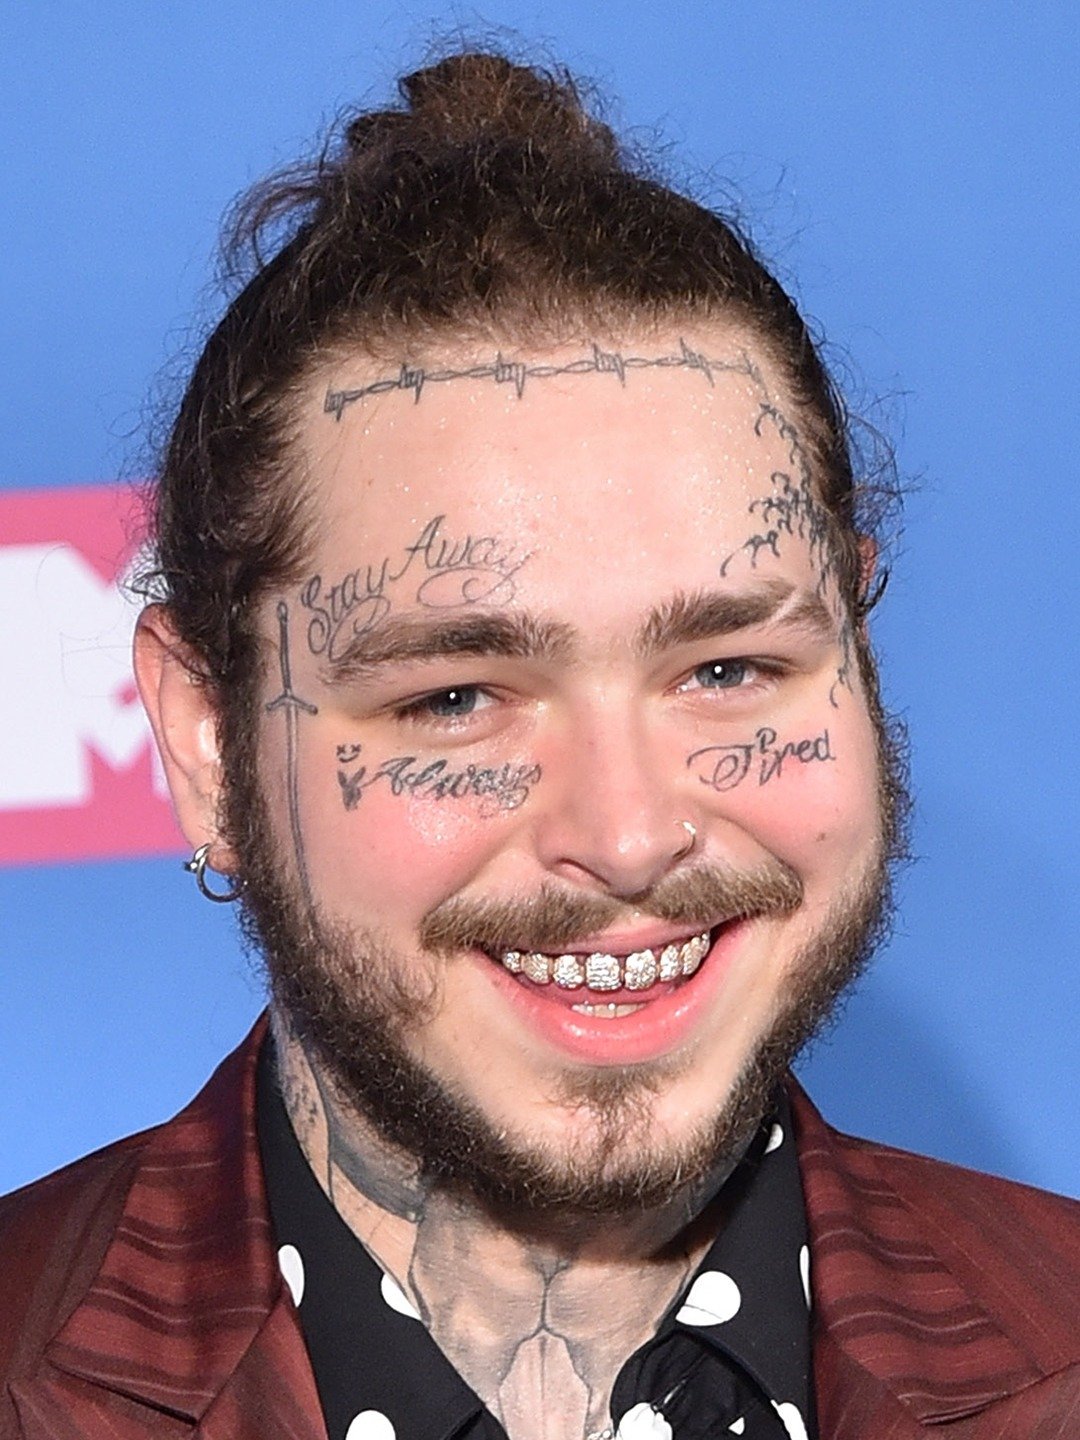 How tall is Post Malone?